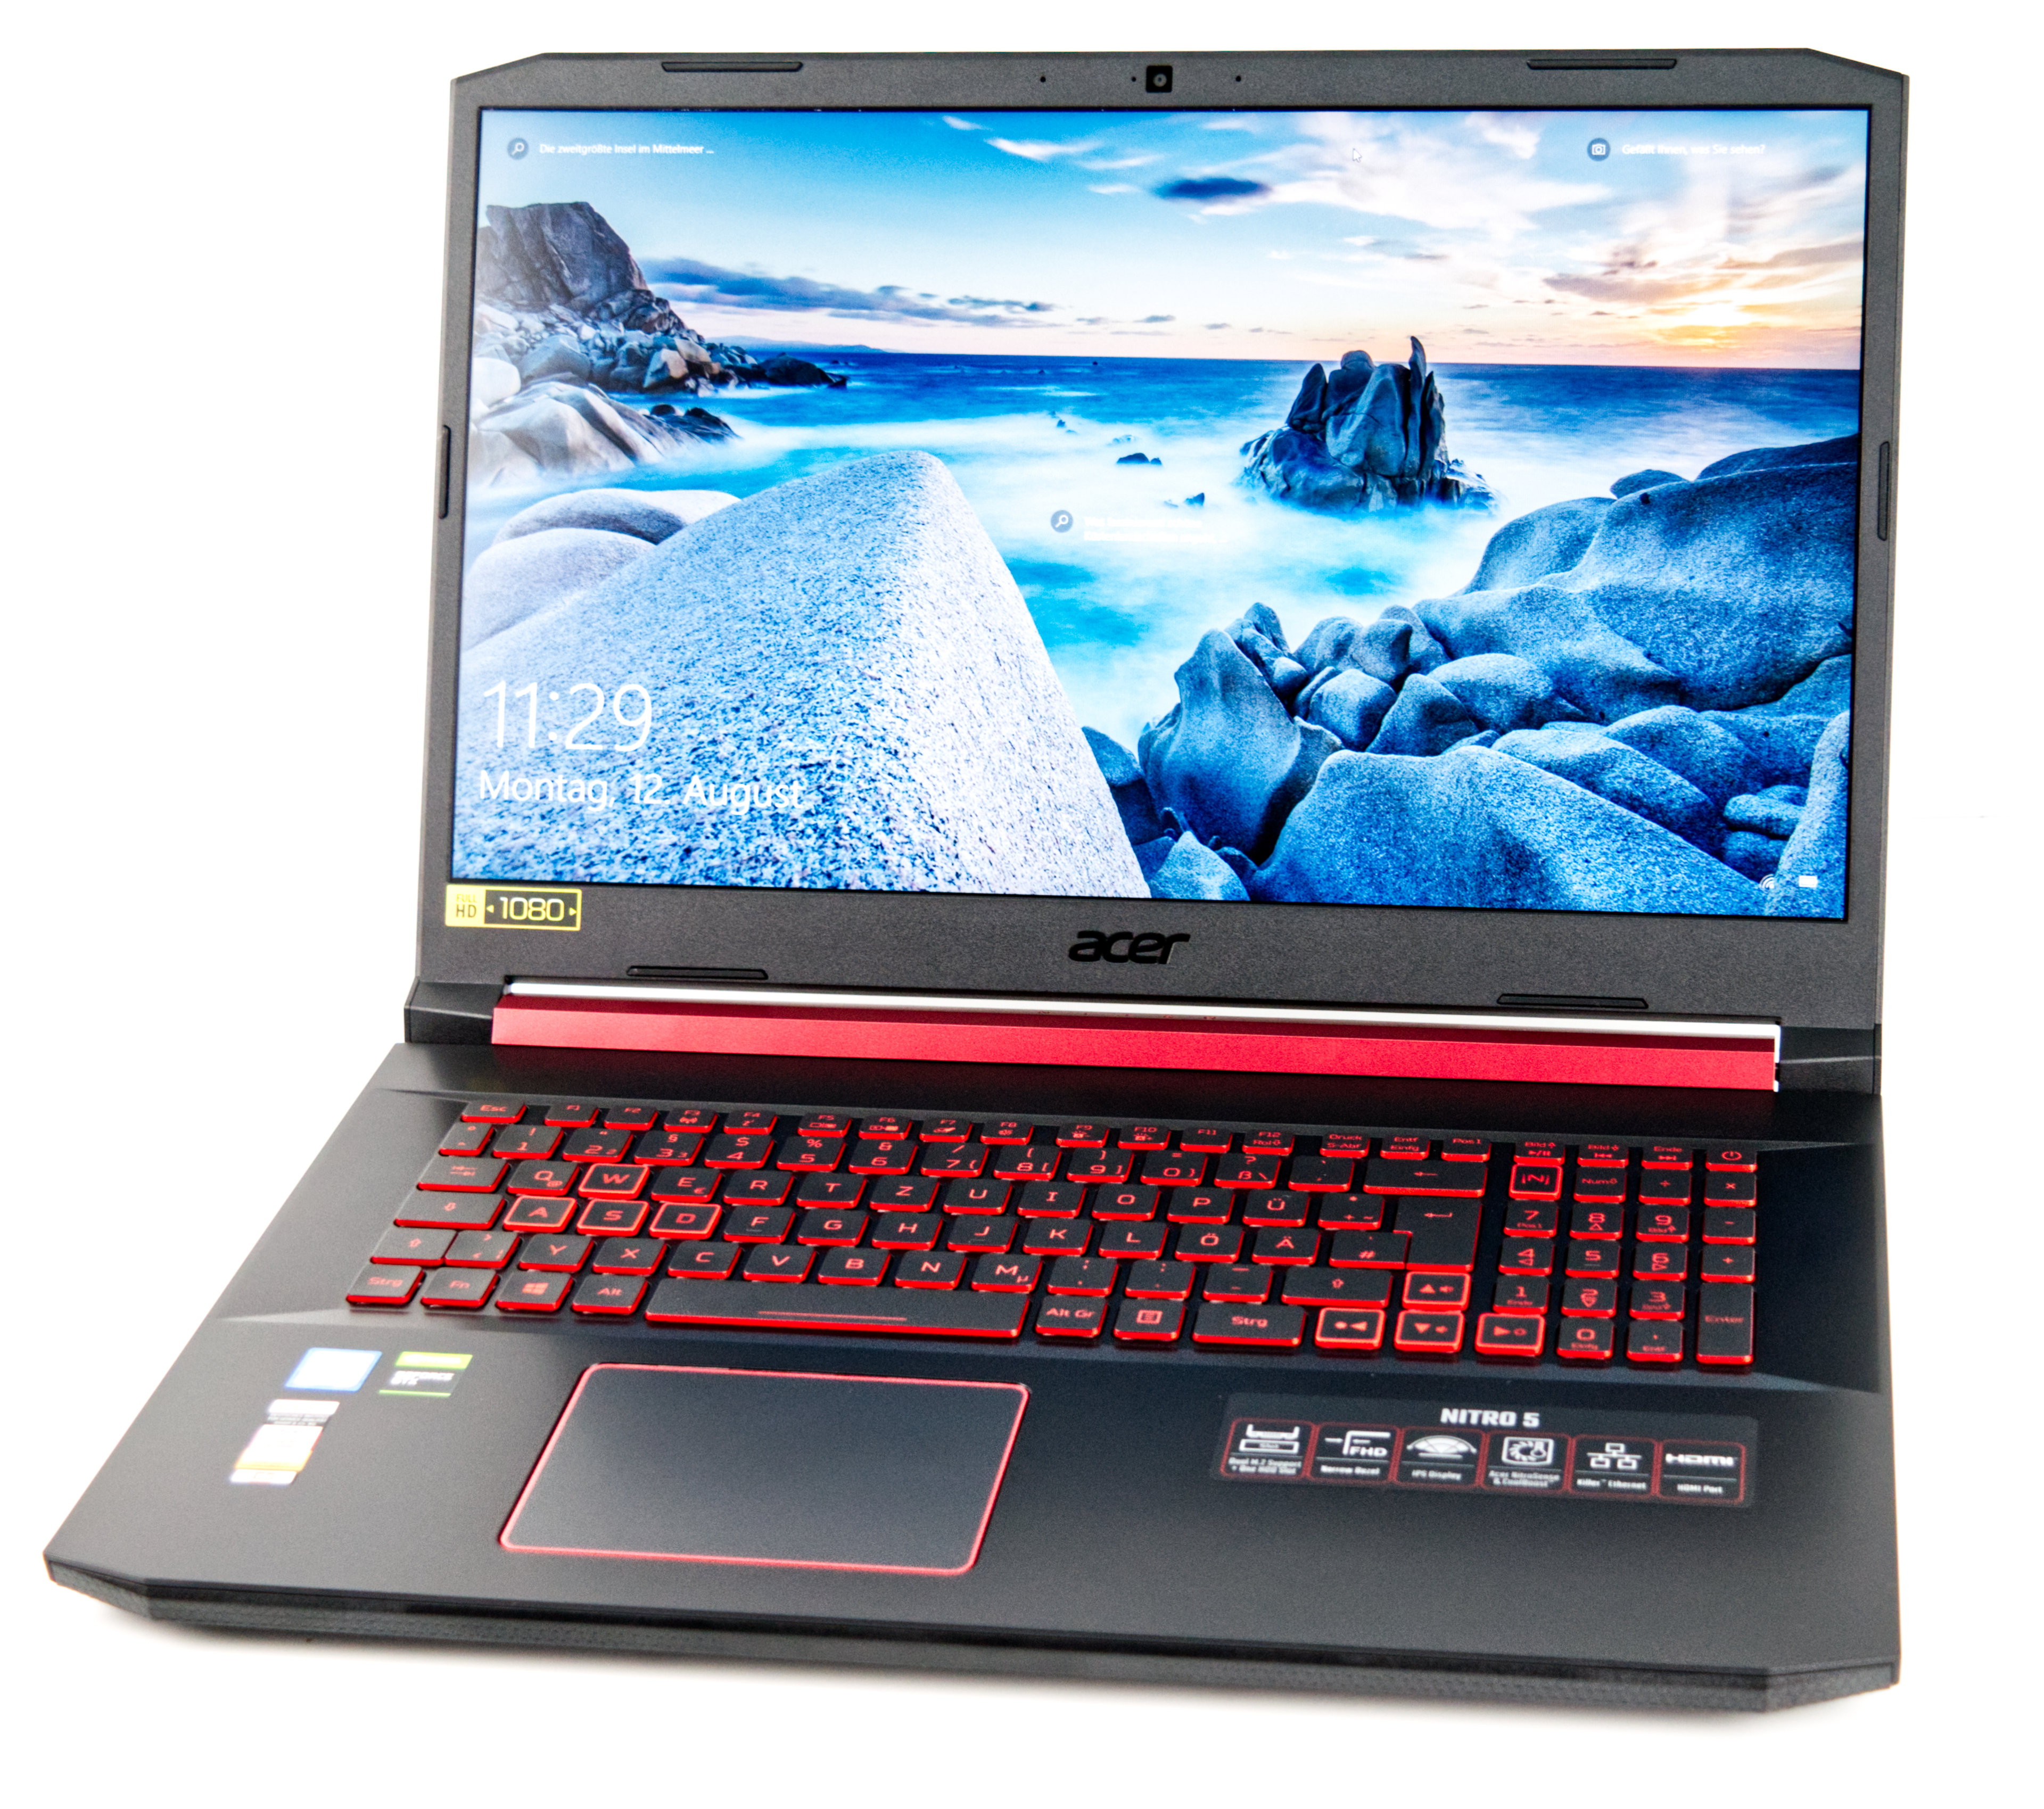 Acer Nitro 5 (2022) review: A gaming laptop with killer value